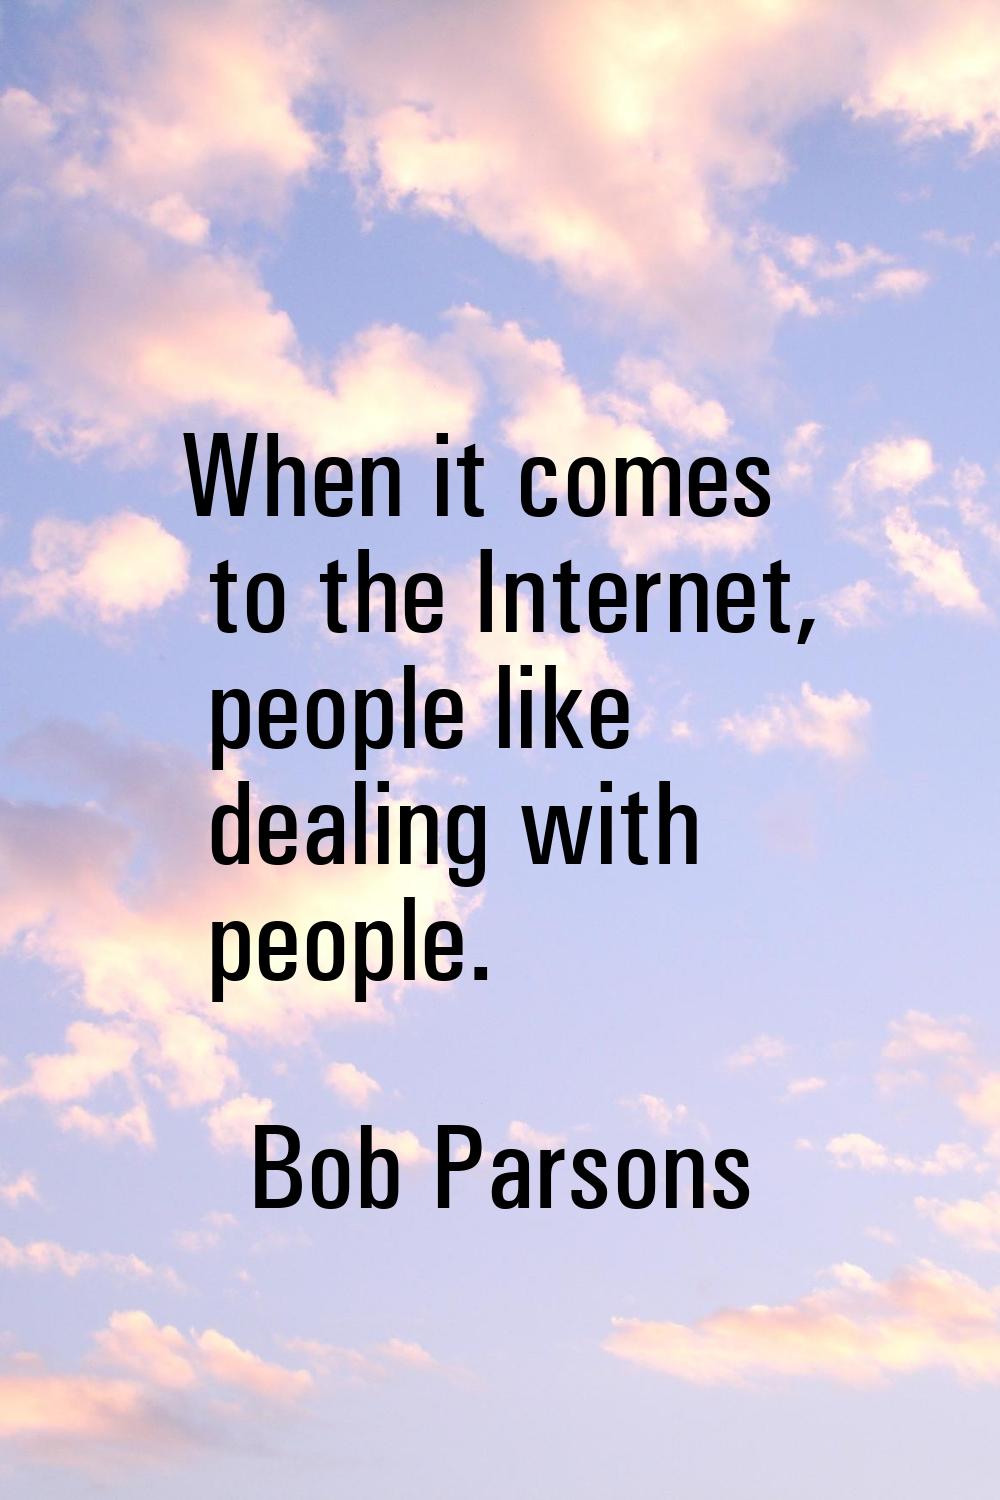 When it comes to the Internet, people like dealing with people.